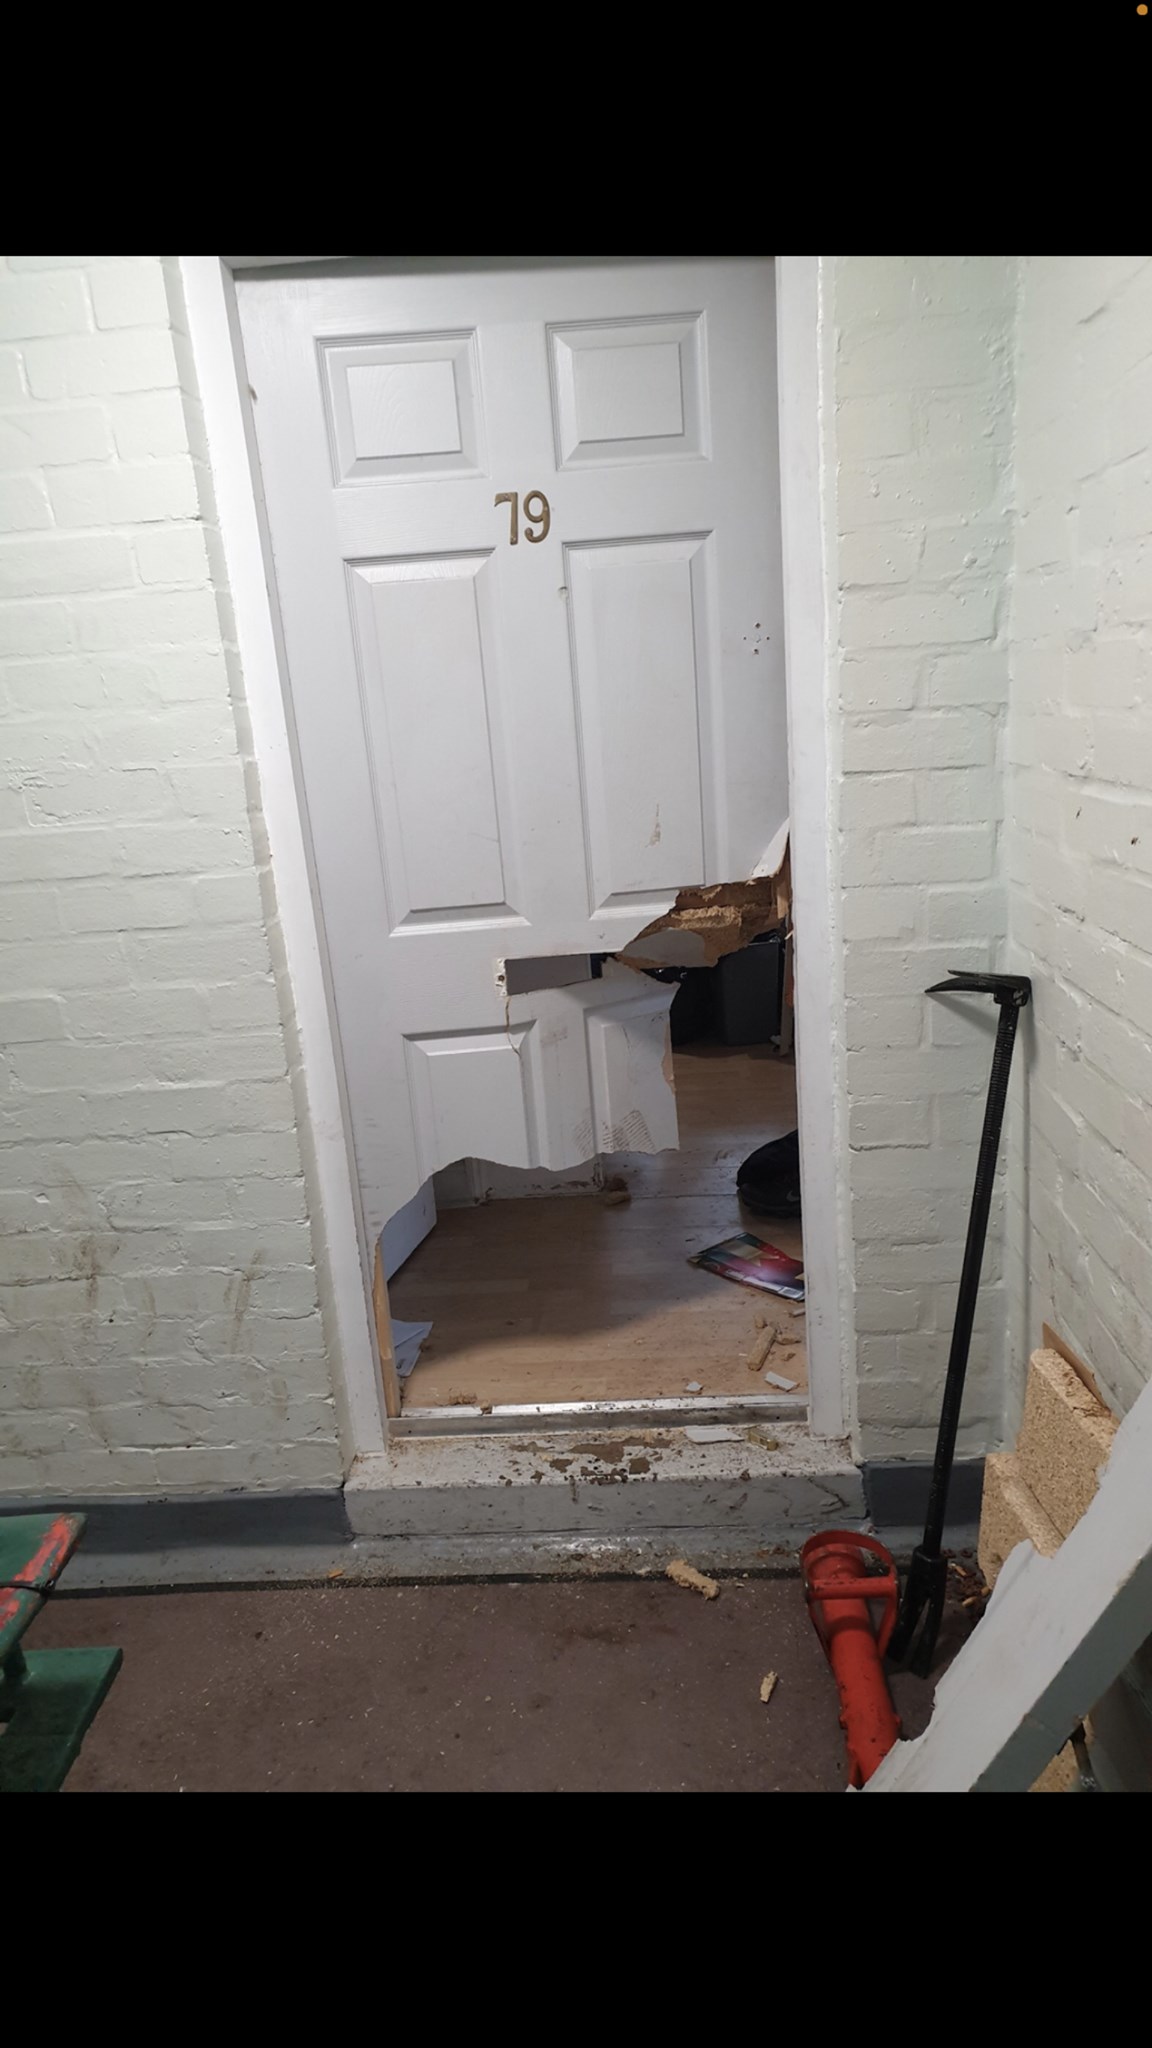 Officers from the Scholes Neighbourhood Policing Team and District Tasking Team executed a warrant under the misuse of drugs act at Scholes this morning. 